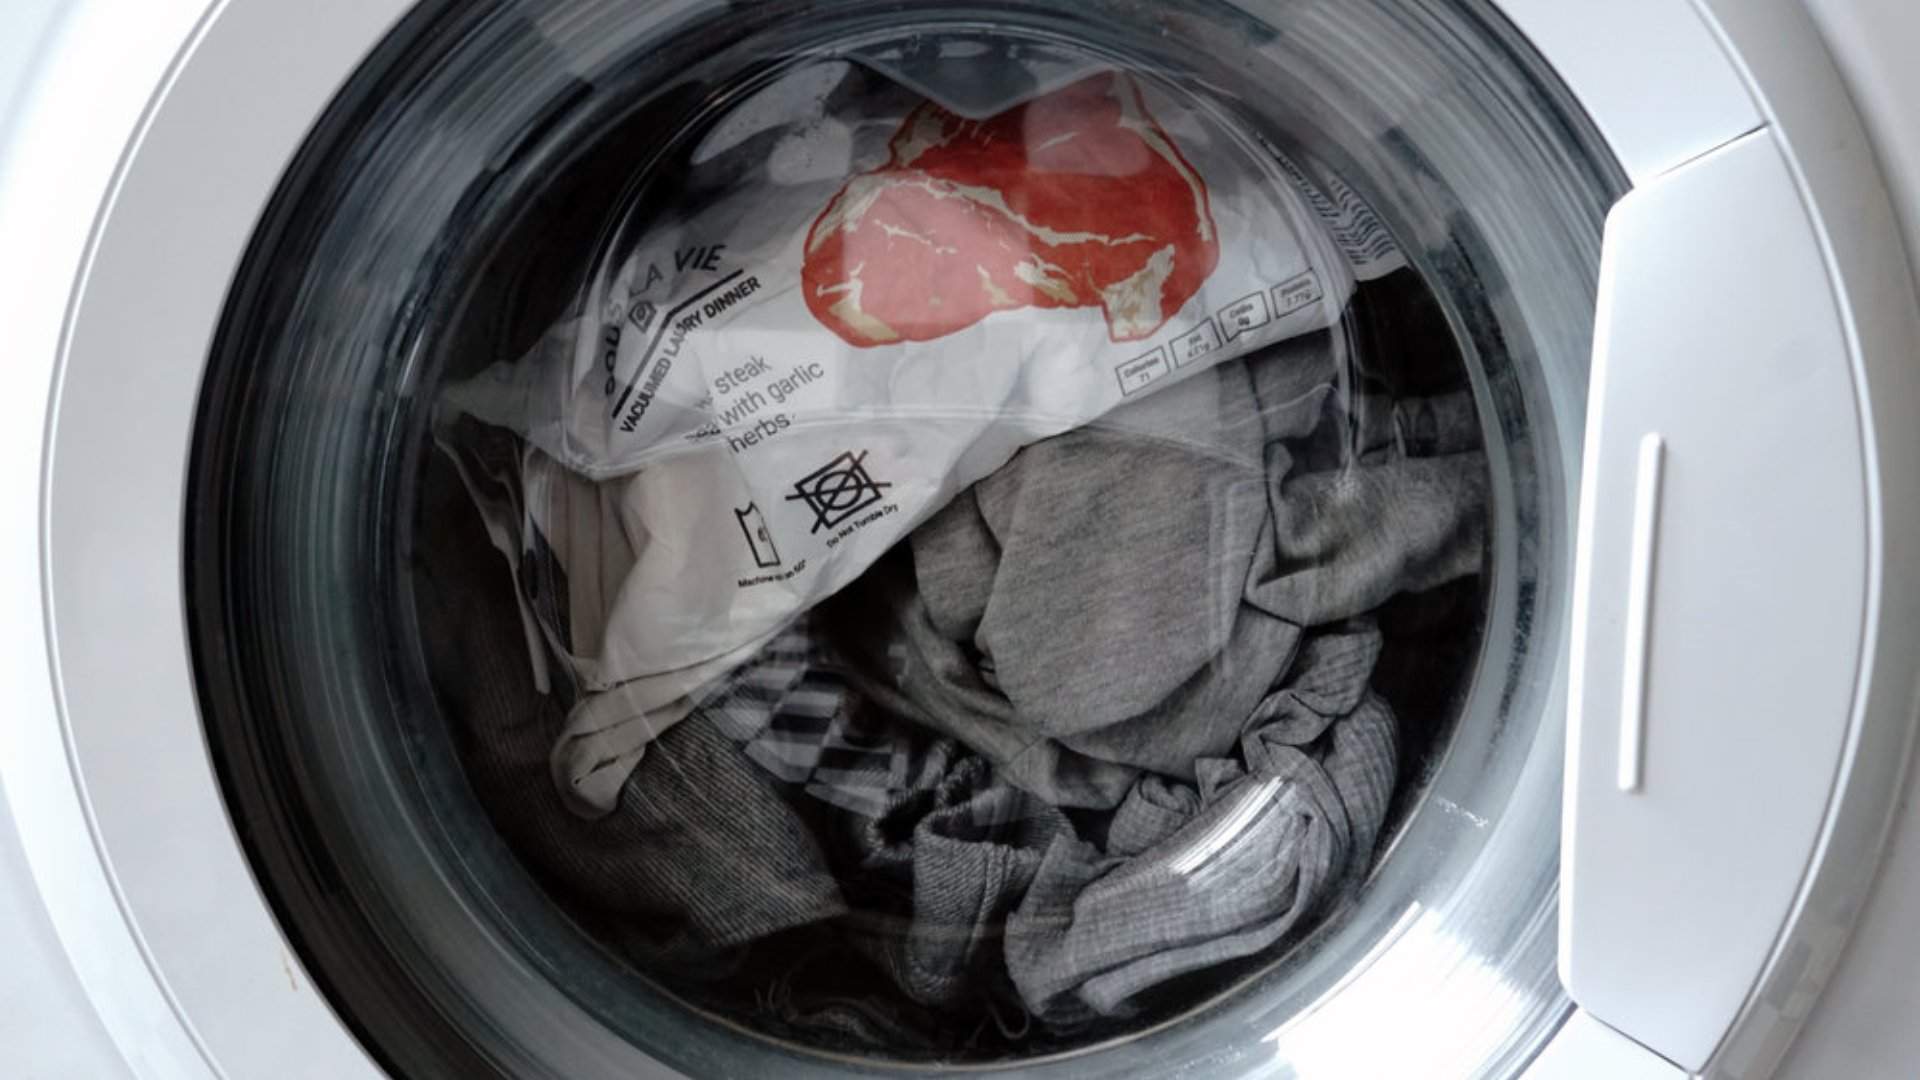 Some Genius/Nutcase Has Created Instant Meals You Cook in the Washing Machine